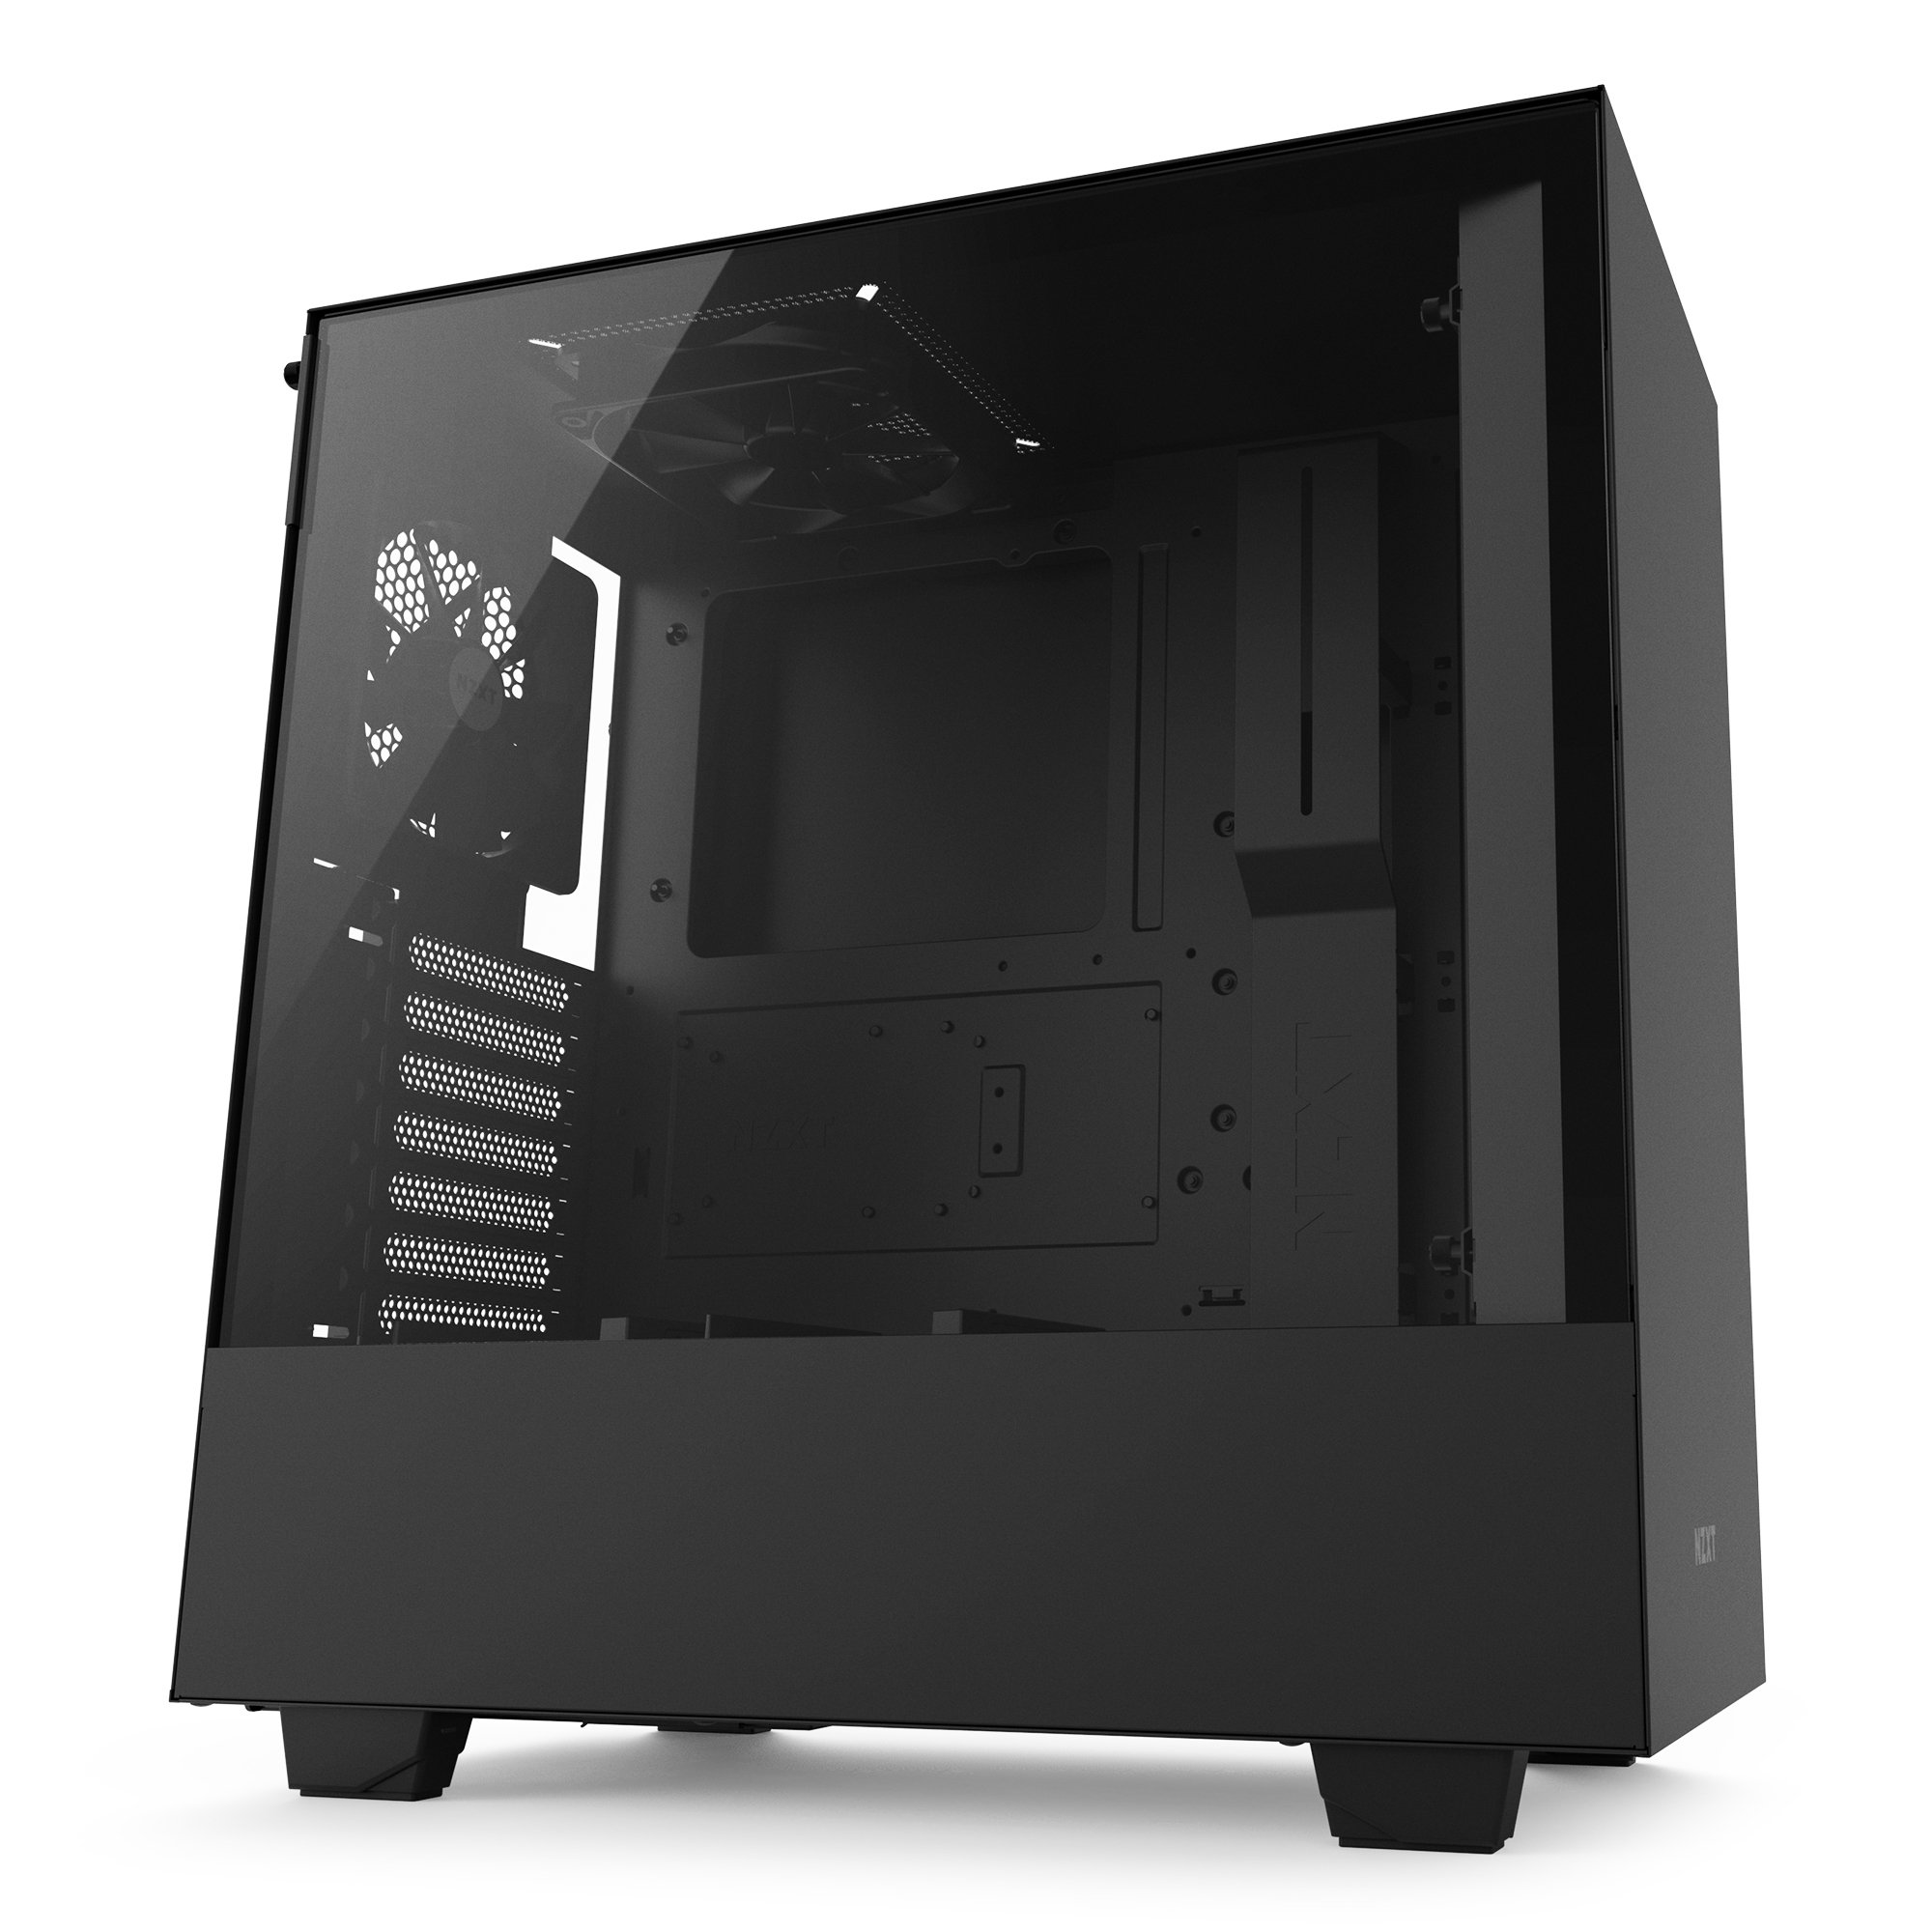 Book Cover NZXT CA-H500B-B1 – Compact ATX Mid-Tower PC Gaming Case – Tempered Glass Panel – Enhanced Cable Management System – Water-Cooling Ready - Black - 2018 Model Black H500 Non i-Series